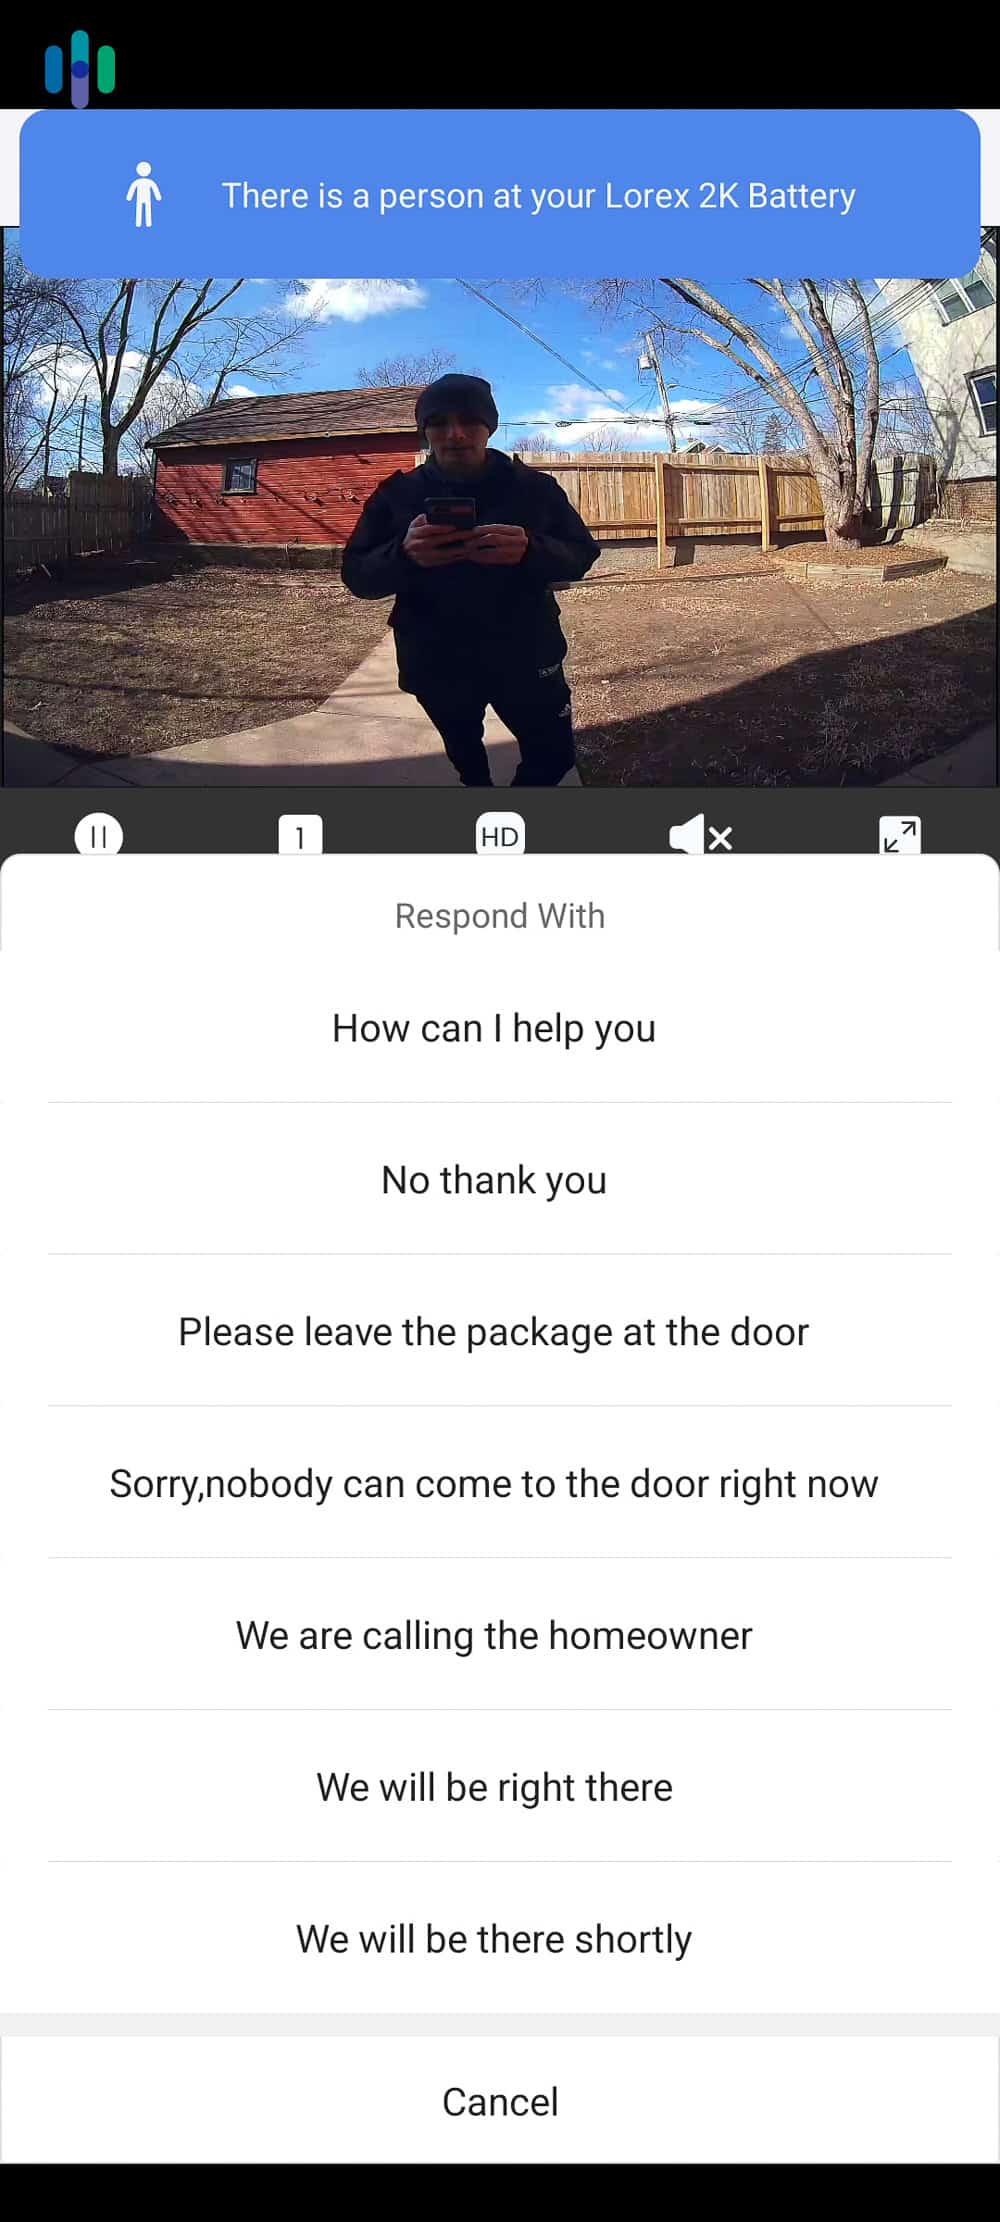 Response options when a person is detected at your Lorex doorbell.